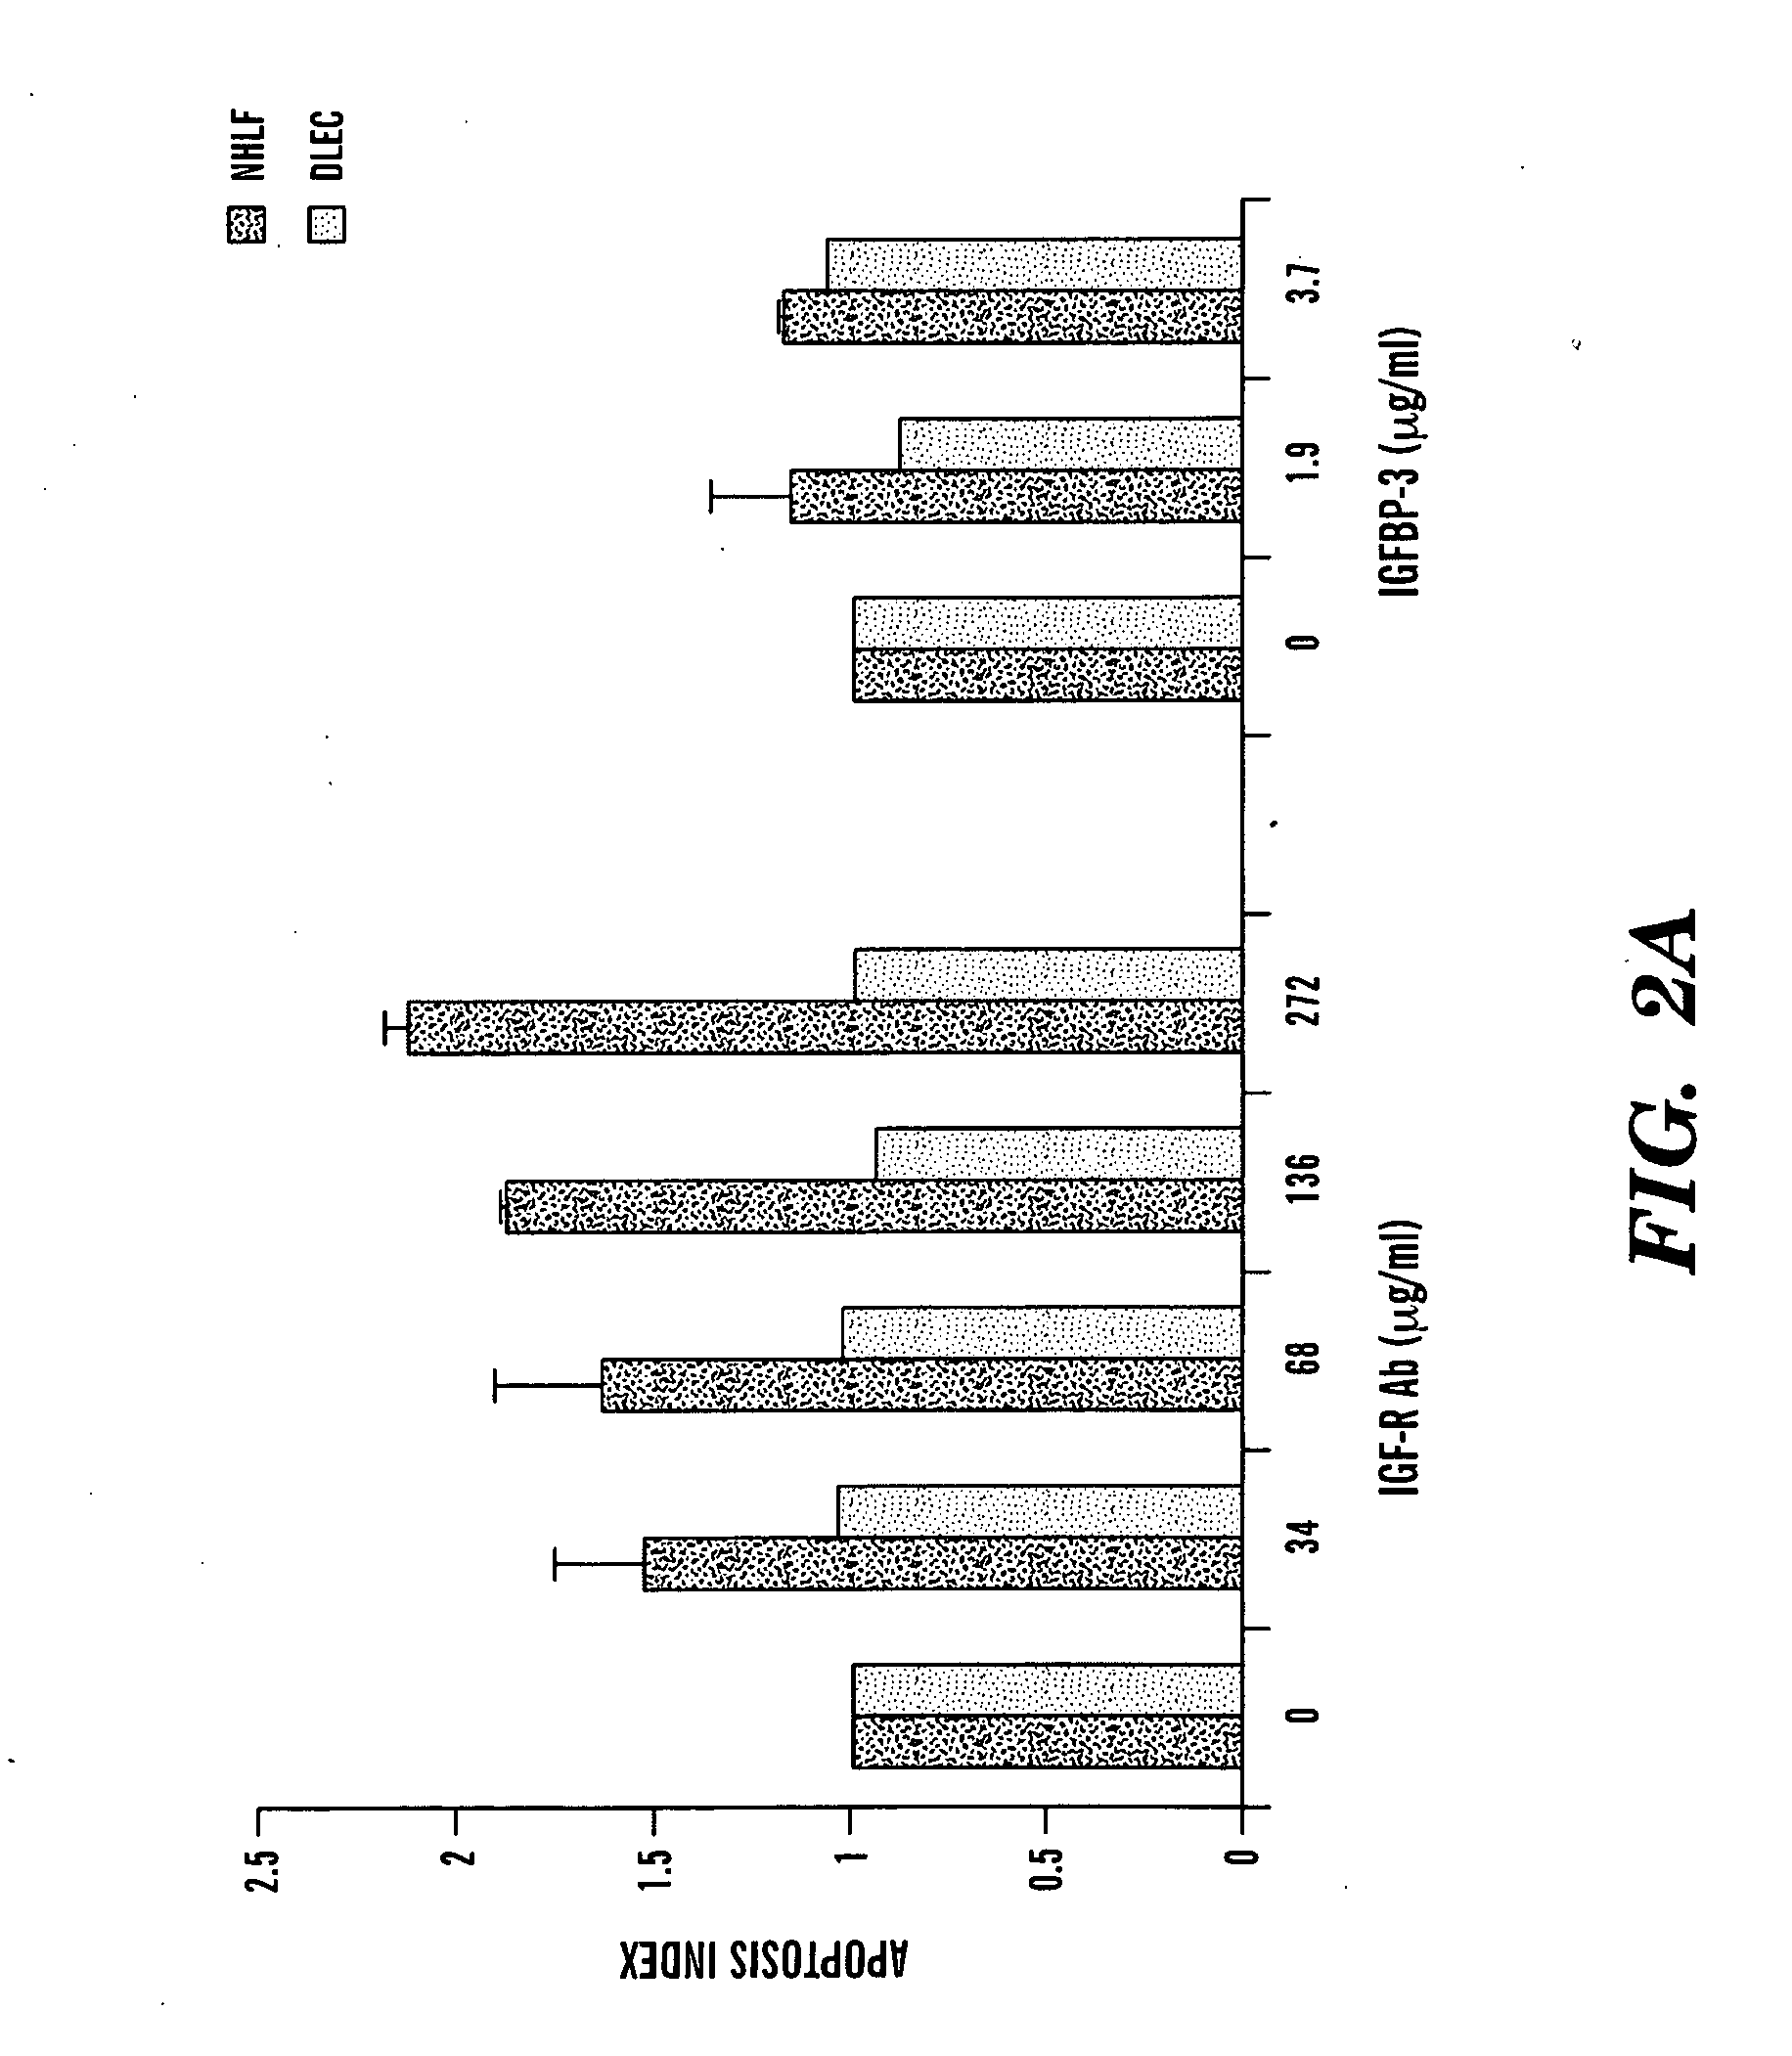 Compositions and methods for the treatment of respiratory disorders